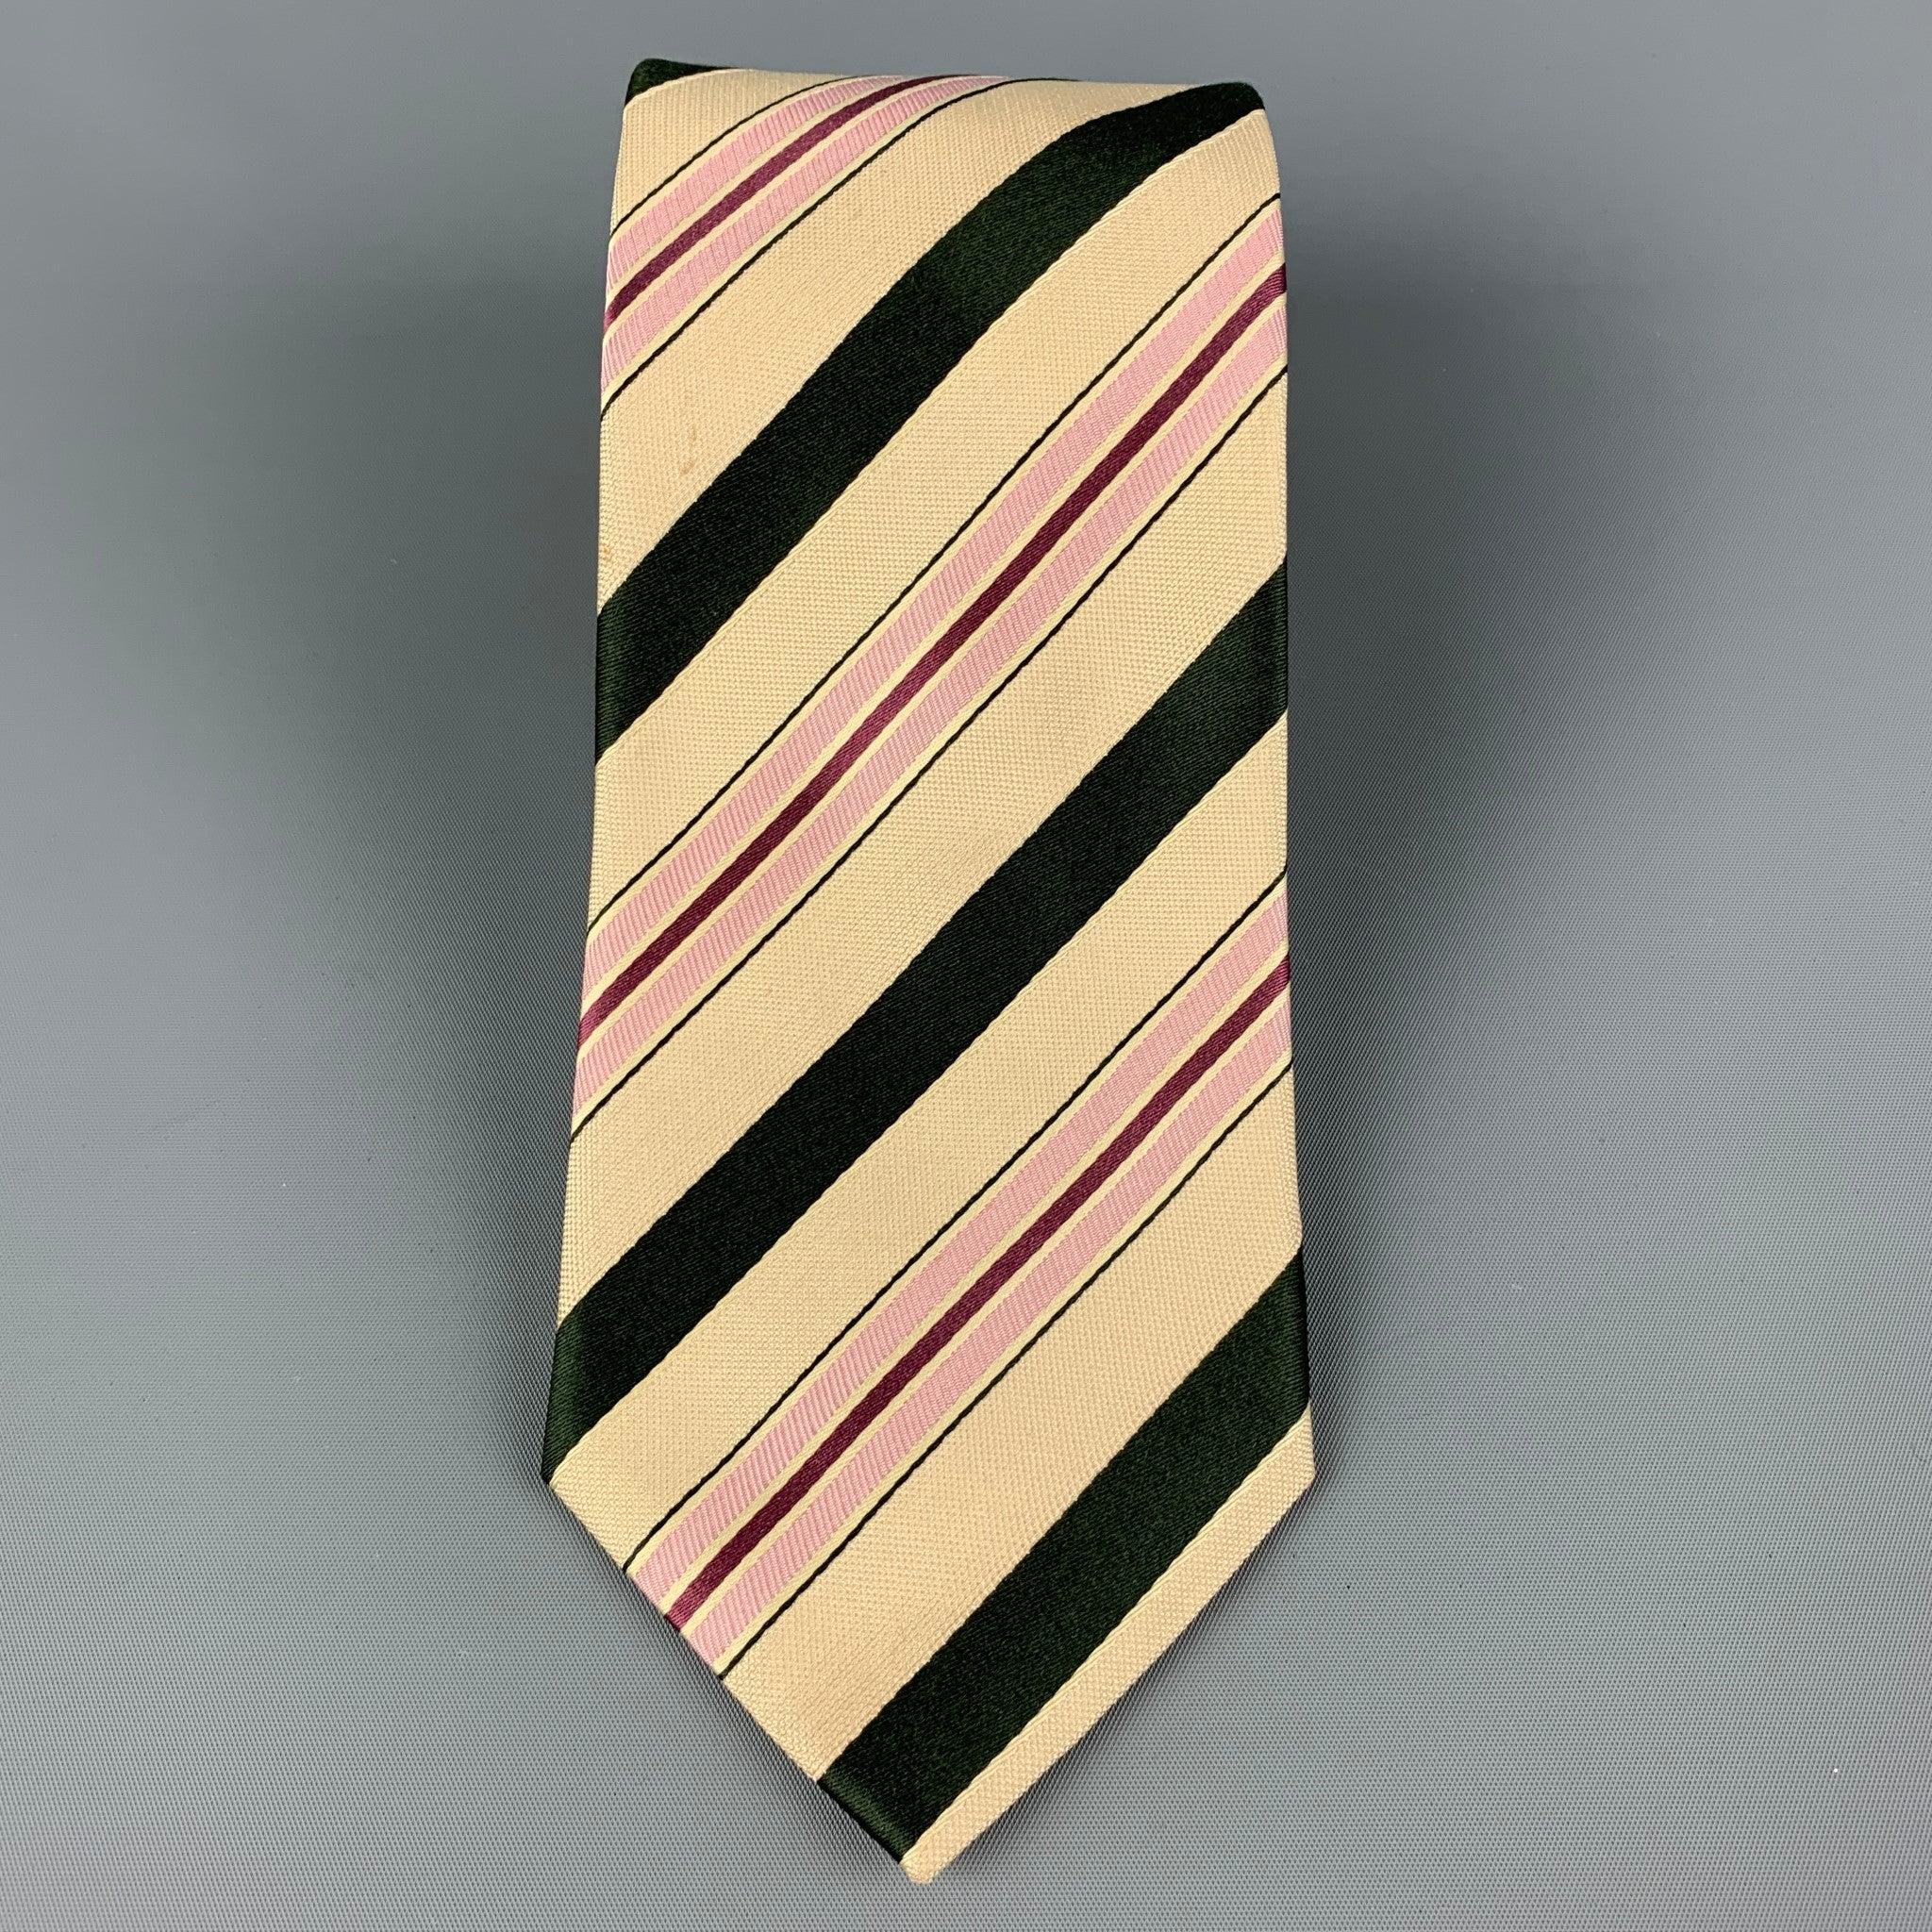 ERMENEGILDO ZEGNA for WILKES BASHFORD necktie comes in a beige & black silk with a all over diagonal stripe print. Made in Italy. Good Pre-Owned Condition. Minor marks. As-Is. Width: 3.75 inches Length: 60 inches 
  
  
 
Reference: 120416
Category: